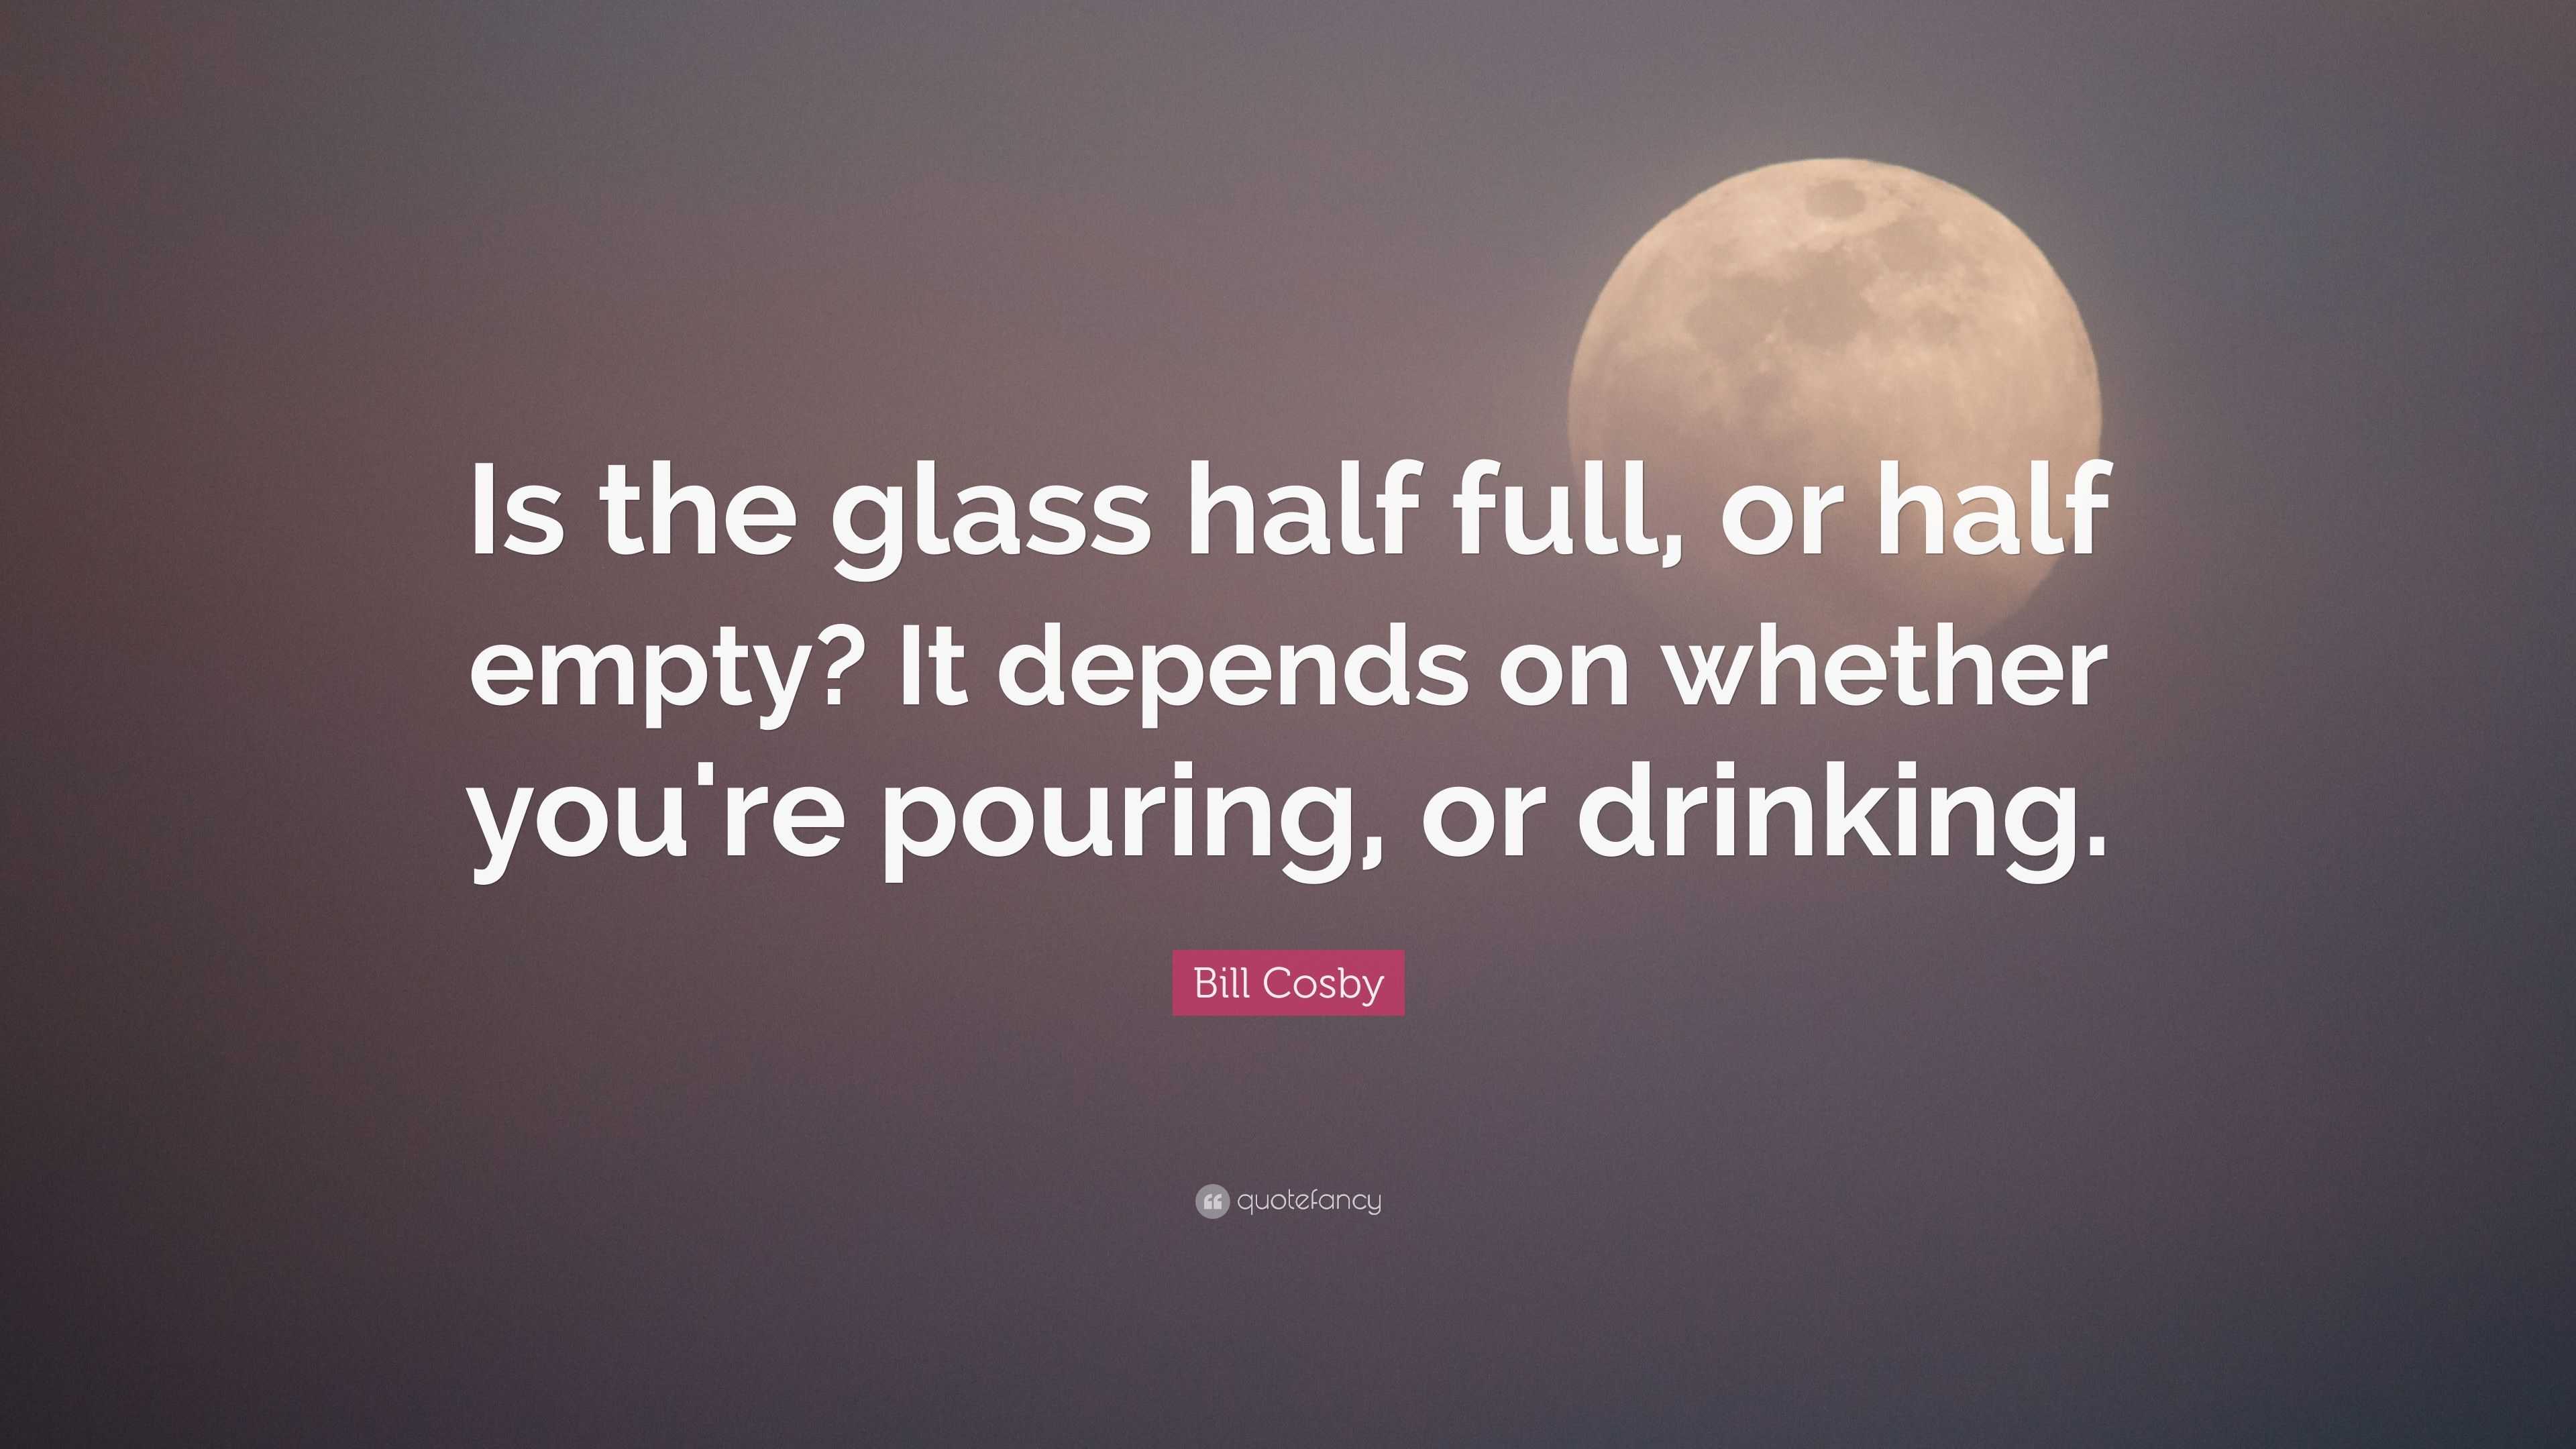 Bill Cosby Quote: “Is the glass half full, or half empty? It depends on ...